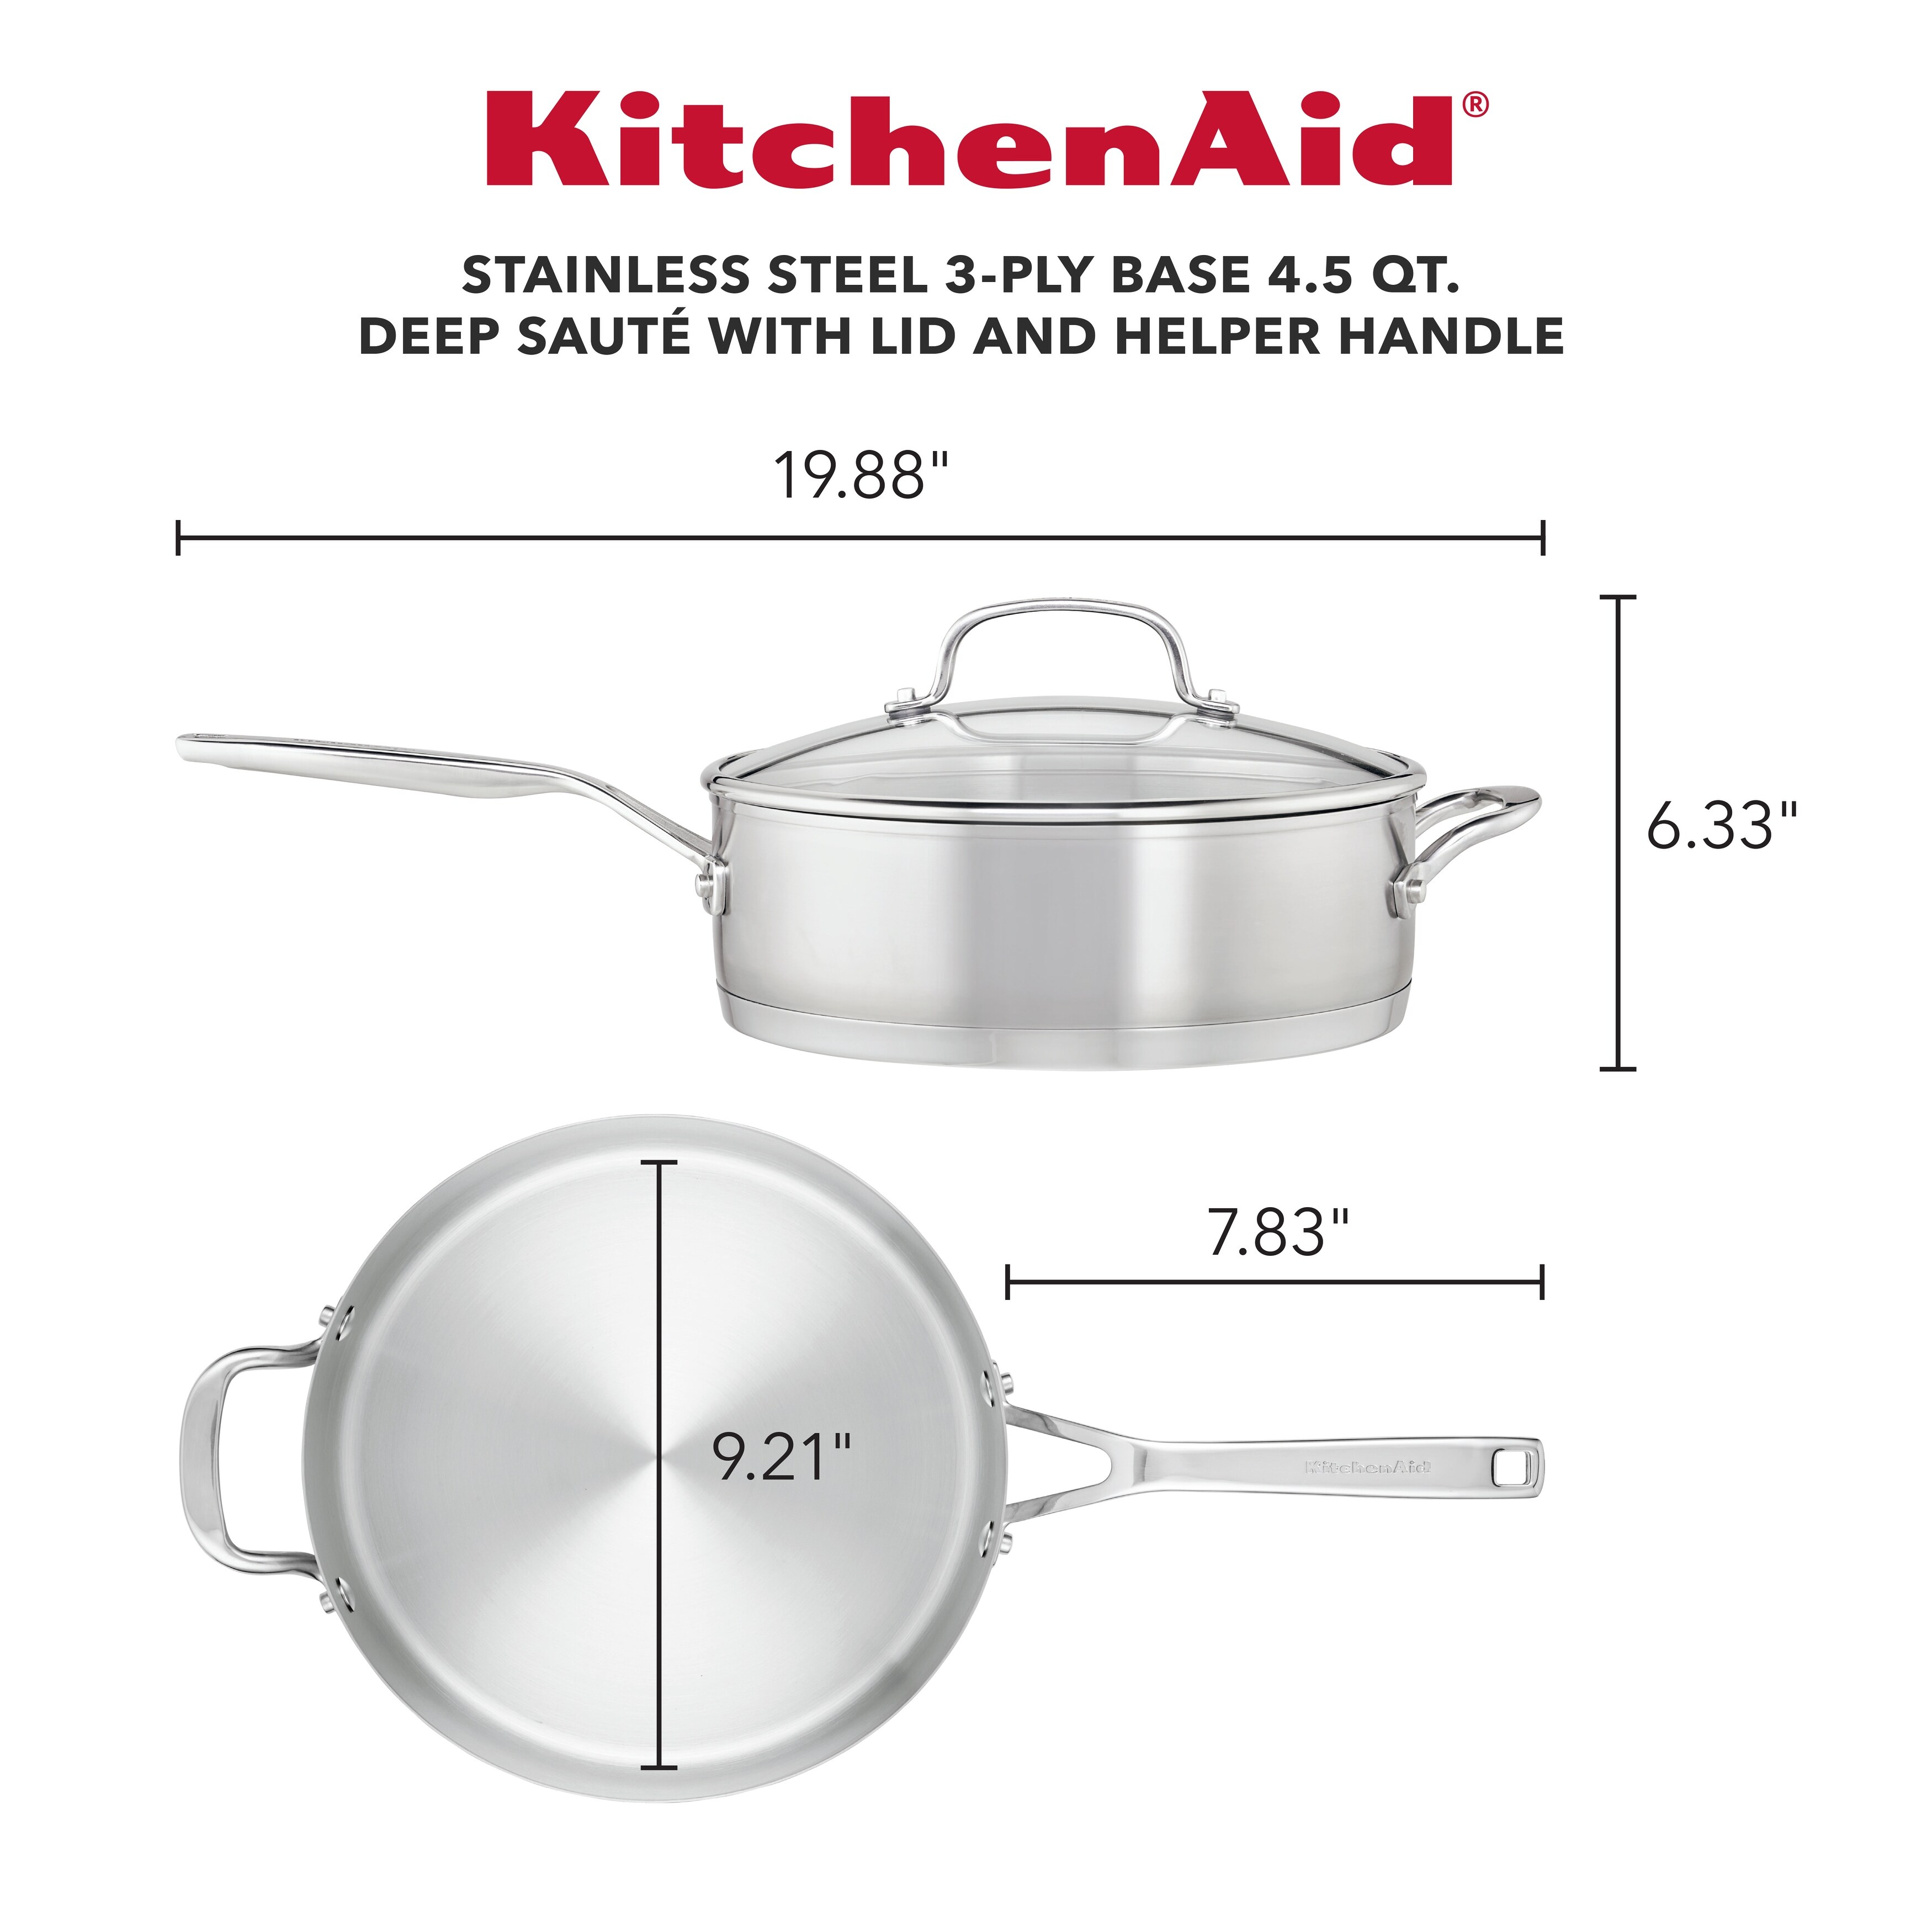 https://ak1.ostkcdn.com/images/products/is/images/direct/aa2ca34732290b2ad7d6f4a7cc54f3966aad394a/KitchenAid-3-Ply-Base-Stainless-Steel-Deep-Saute-Pan-with-Lid%2C-4.5qt.jpg